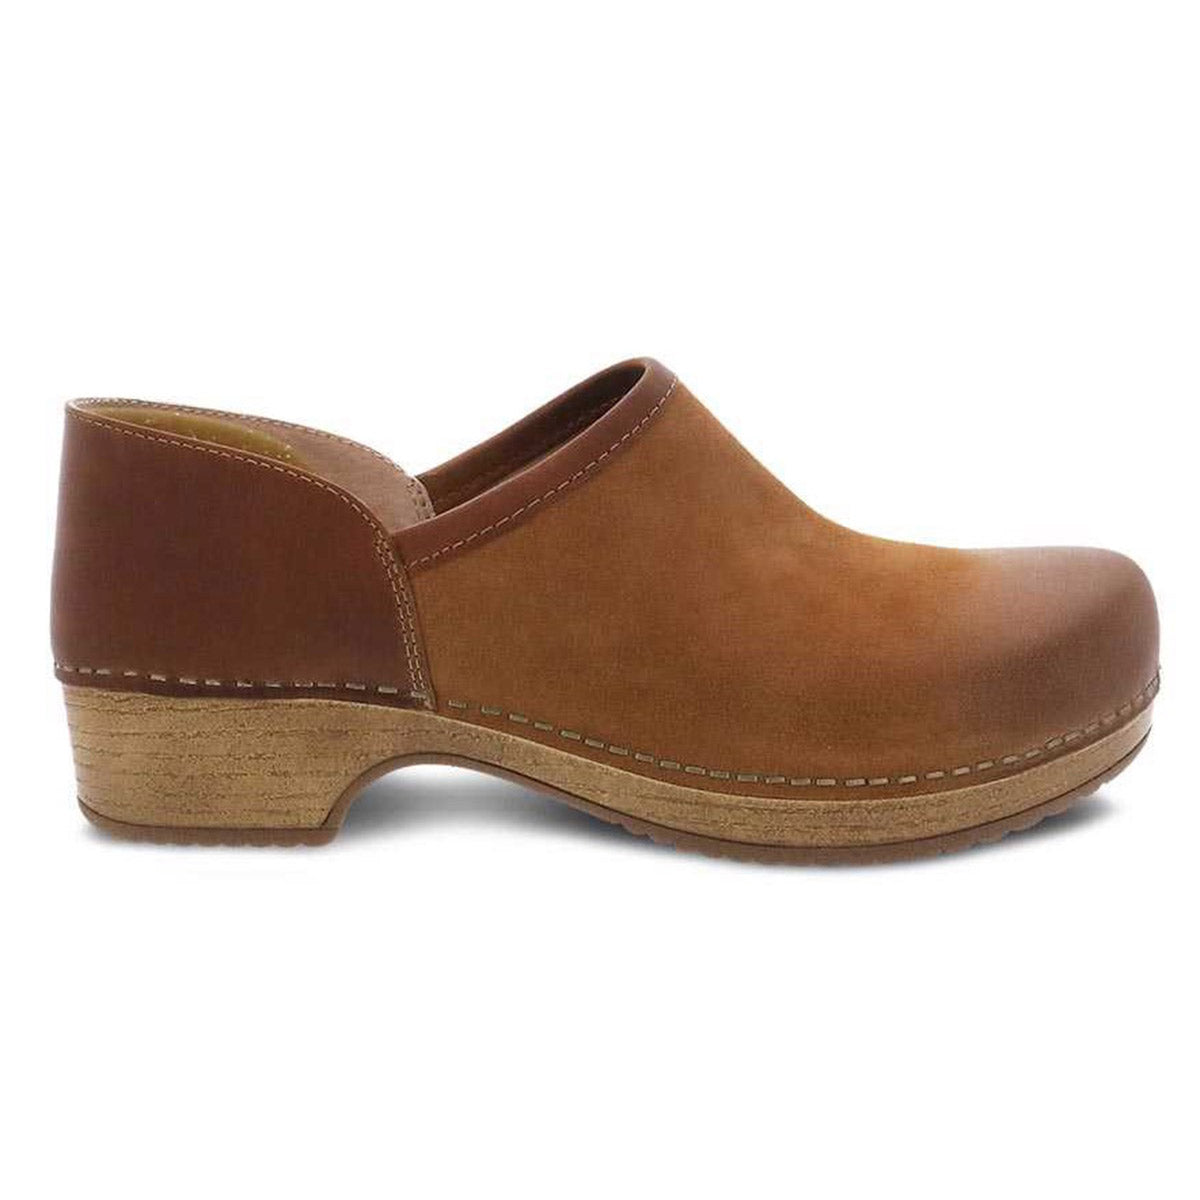 Dansko Brenna Tan Burnished Suede clog with wooden sole on a white background.